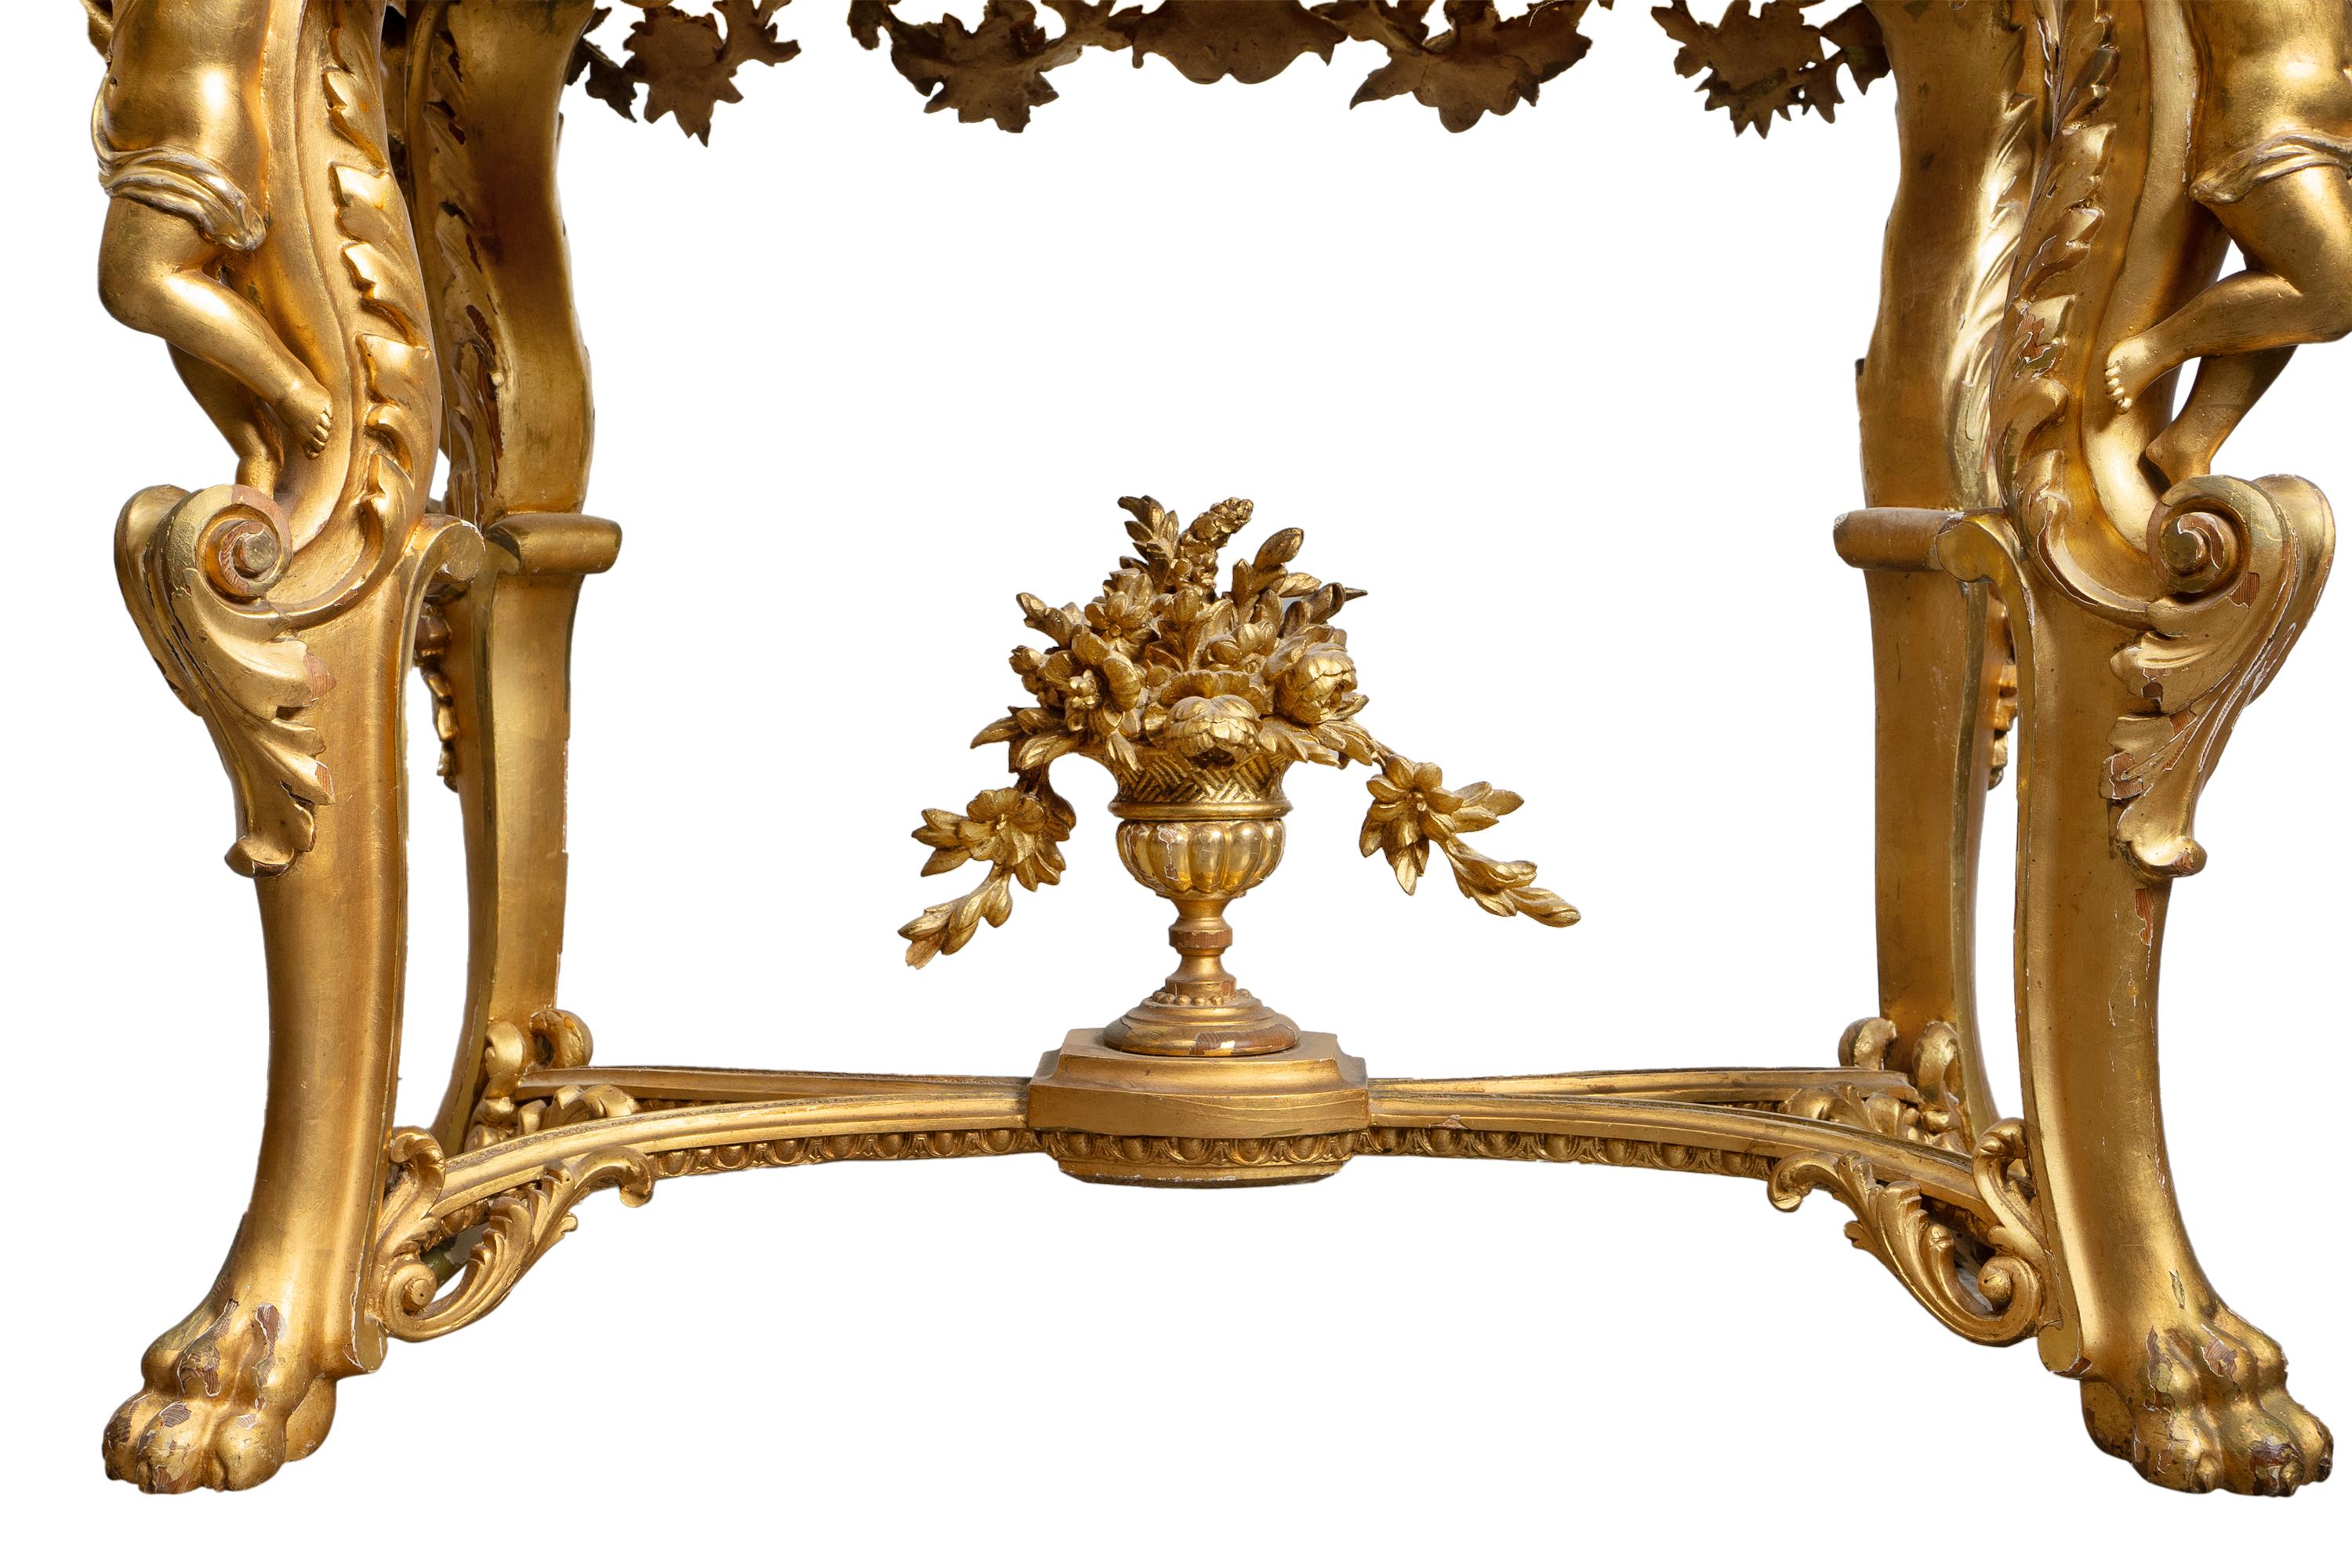 19th Century French Louis XV Style Carved Gilt-Wood & Gesso Figural Side Table For Sale